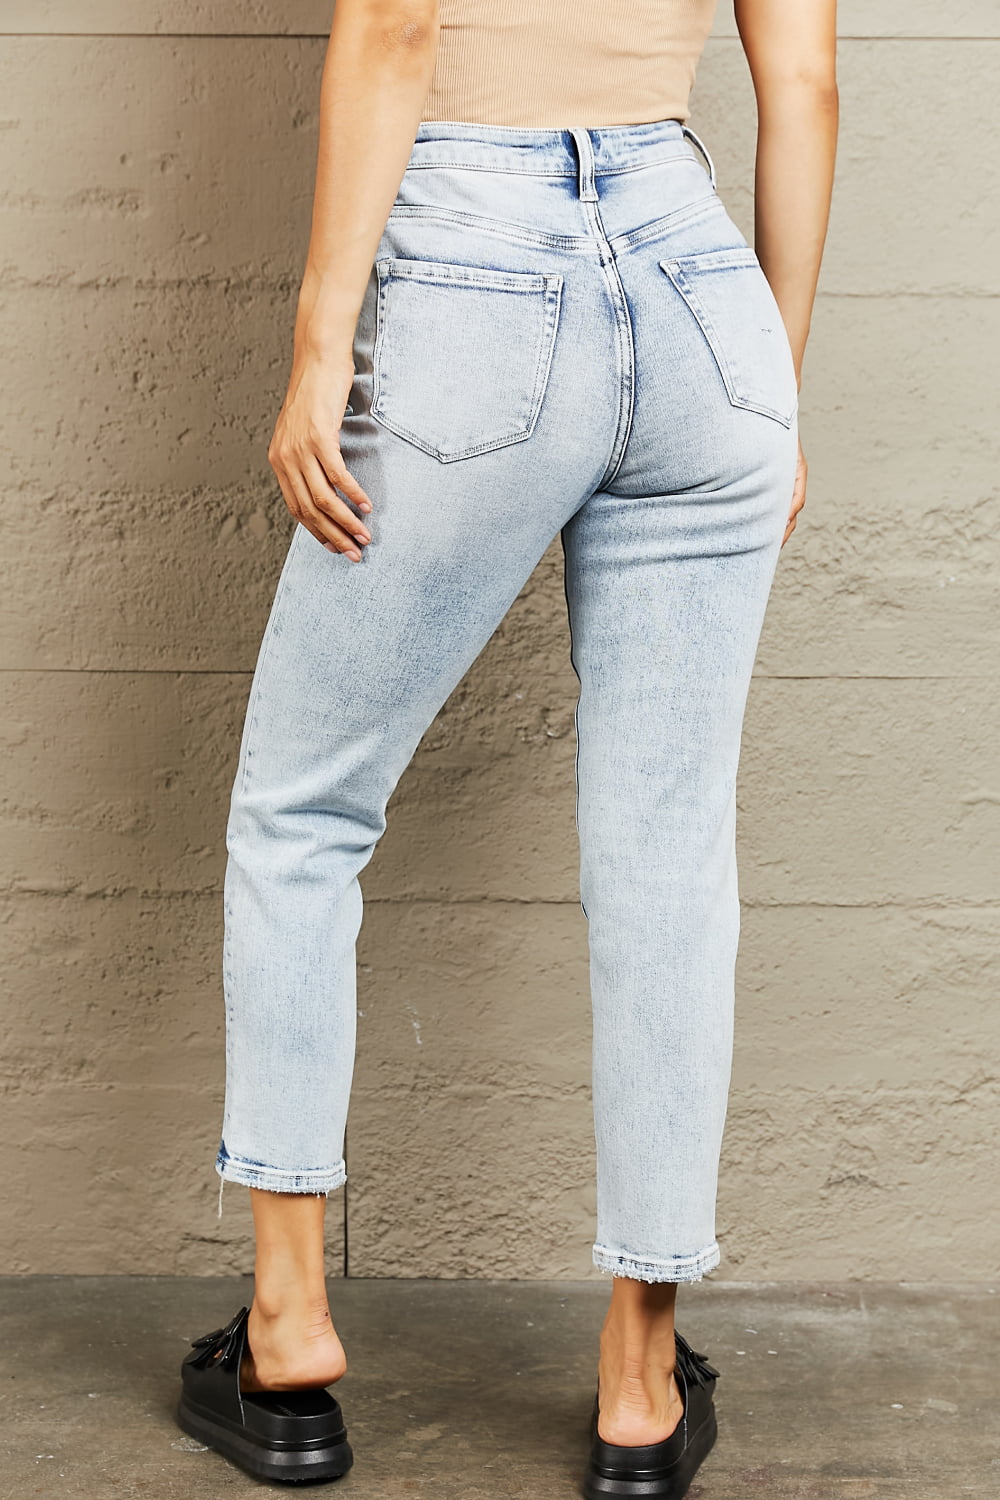 BAYEAS High Waisted Accent Skinny Jeans - Jeans - FITGGINS